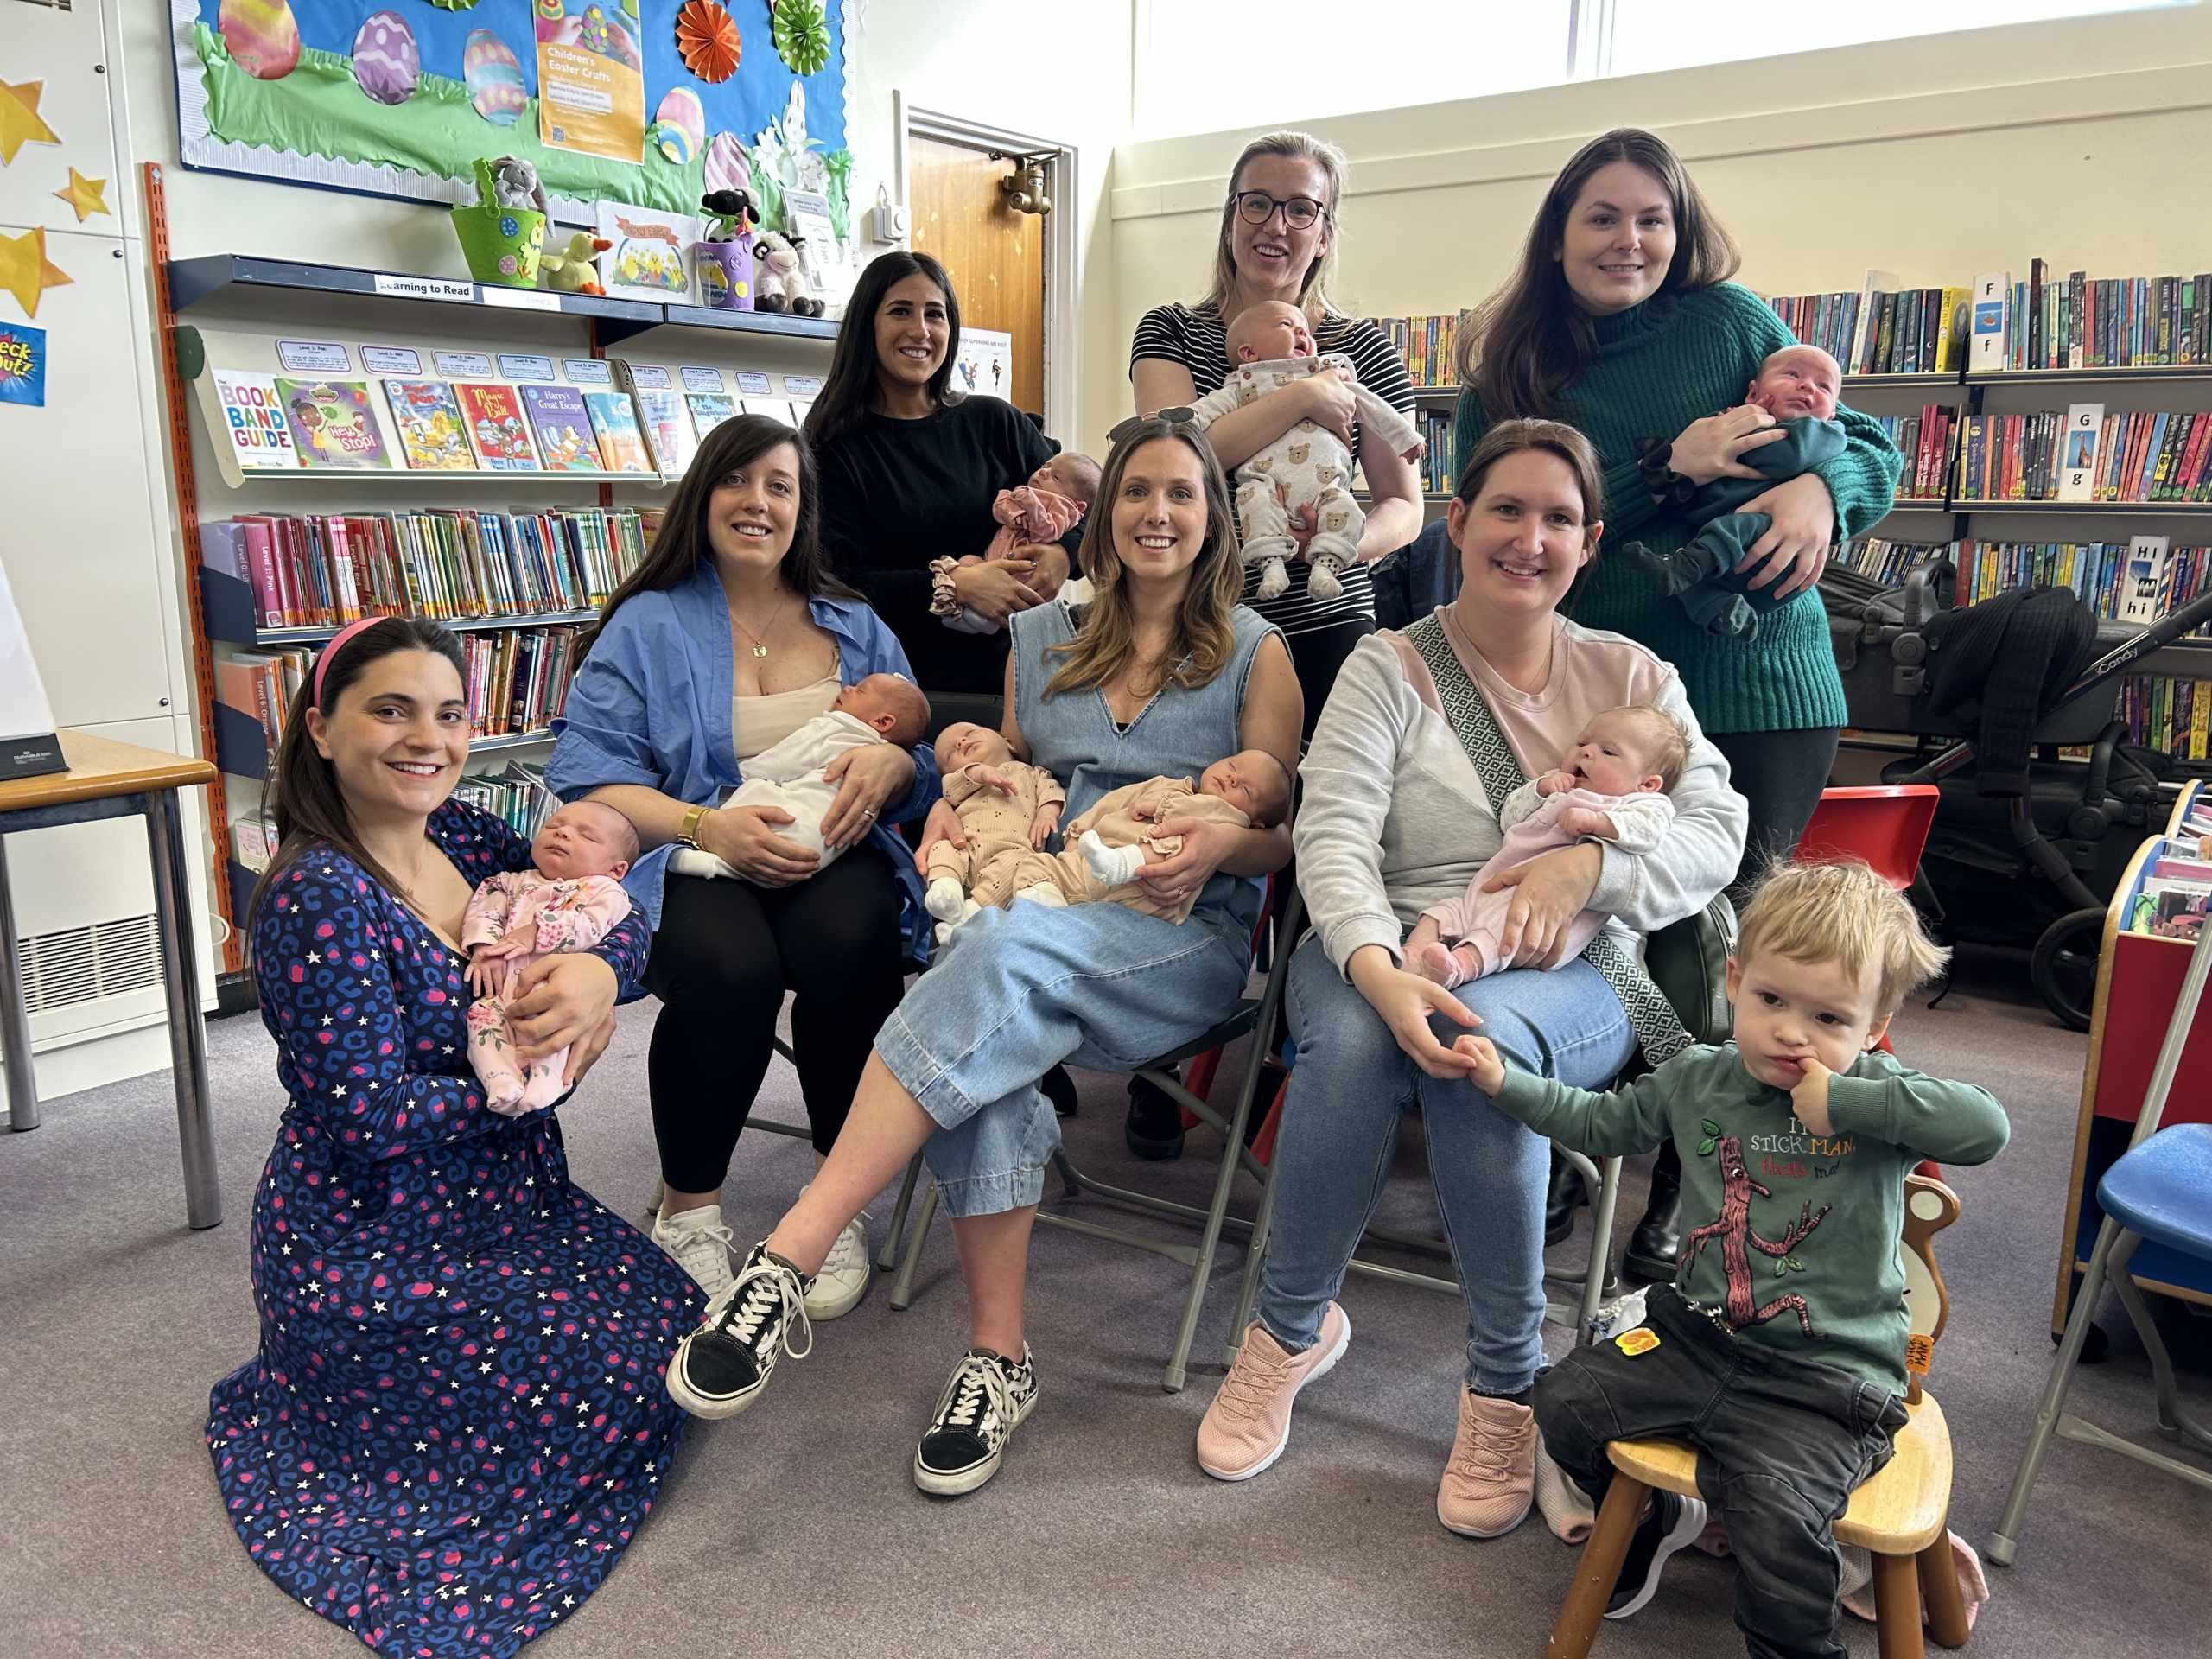 Leigh On Sea News: Baby Record Breakers - RAYLEIGH library welcomed its youngest ever new members, when eight babies from an NCT group signed up to join their local library, with the youngest being just two weeks old. 